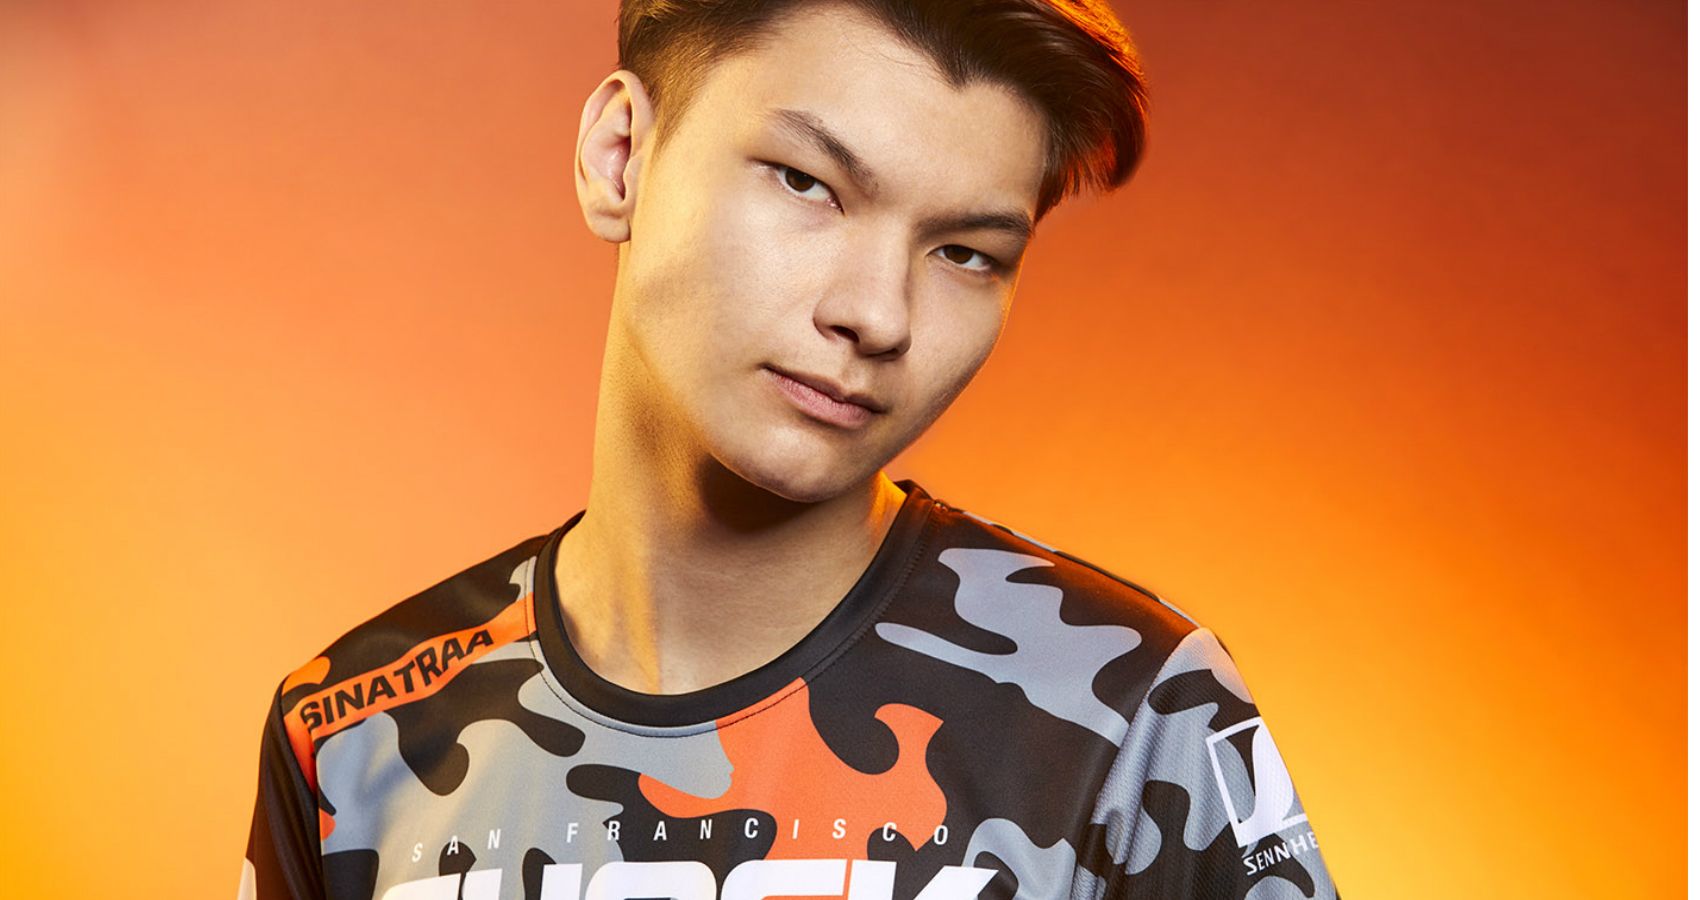 Who Is Sinatraa? An Overwatch League Player Profile